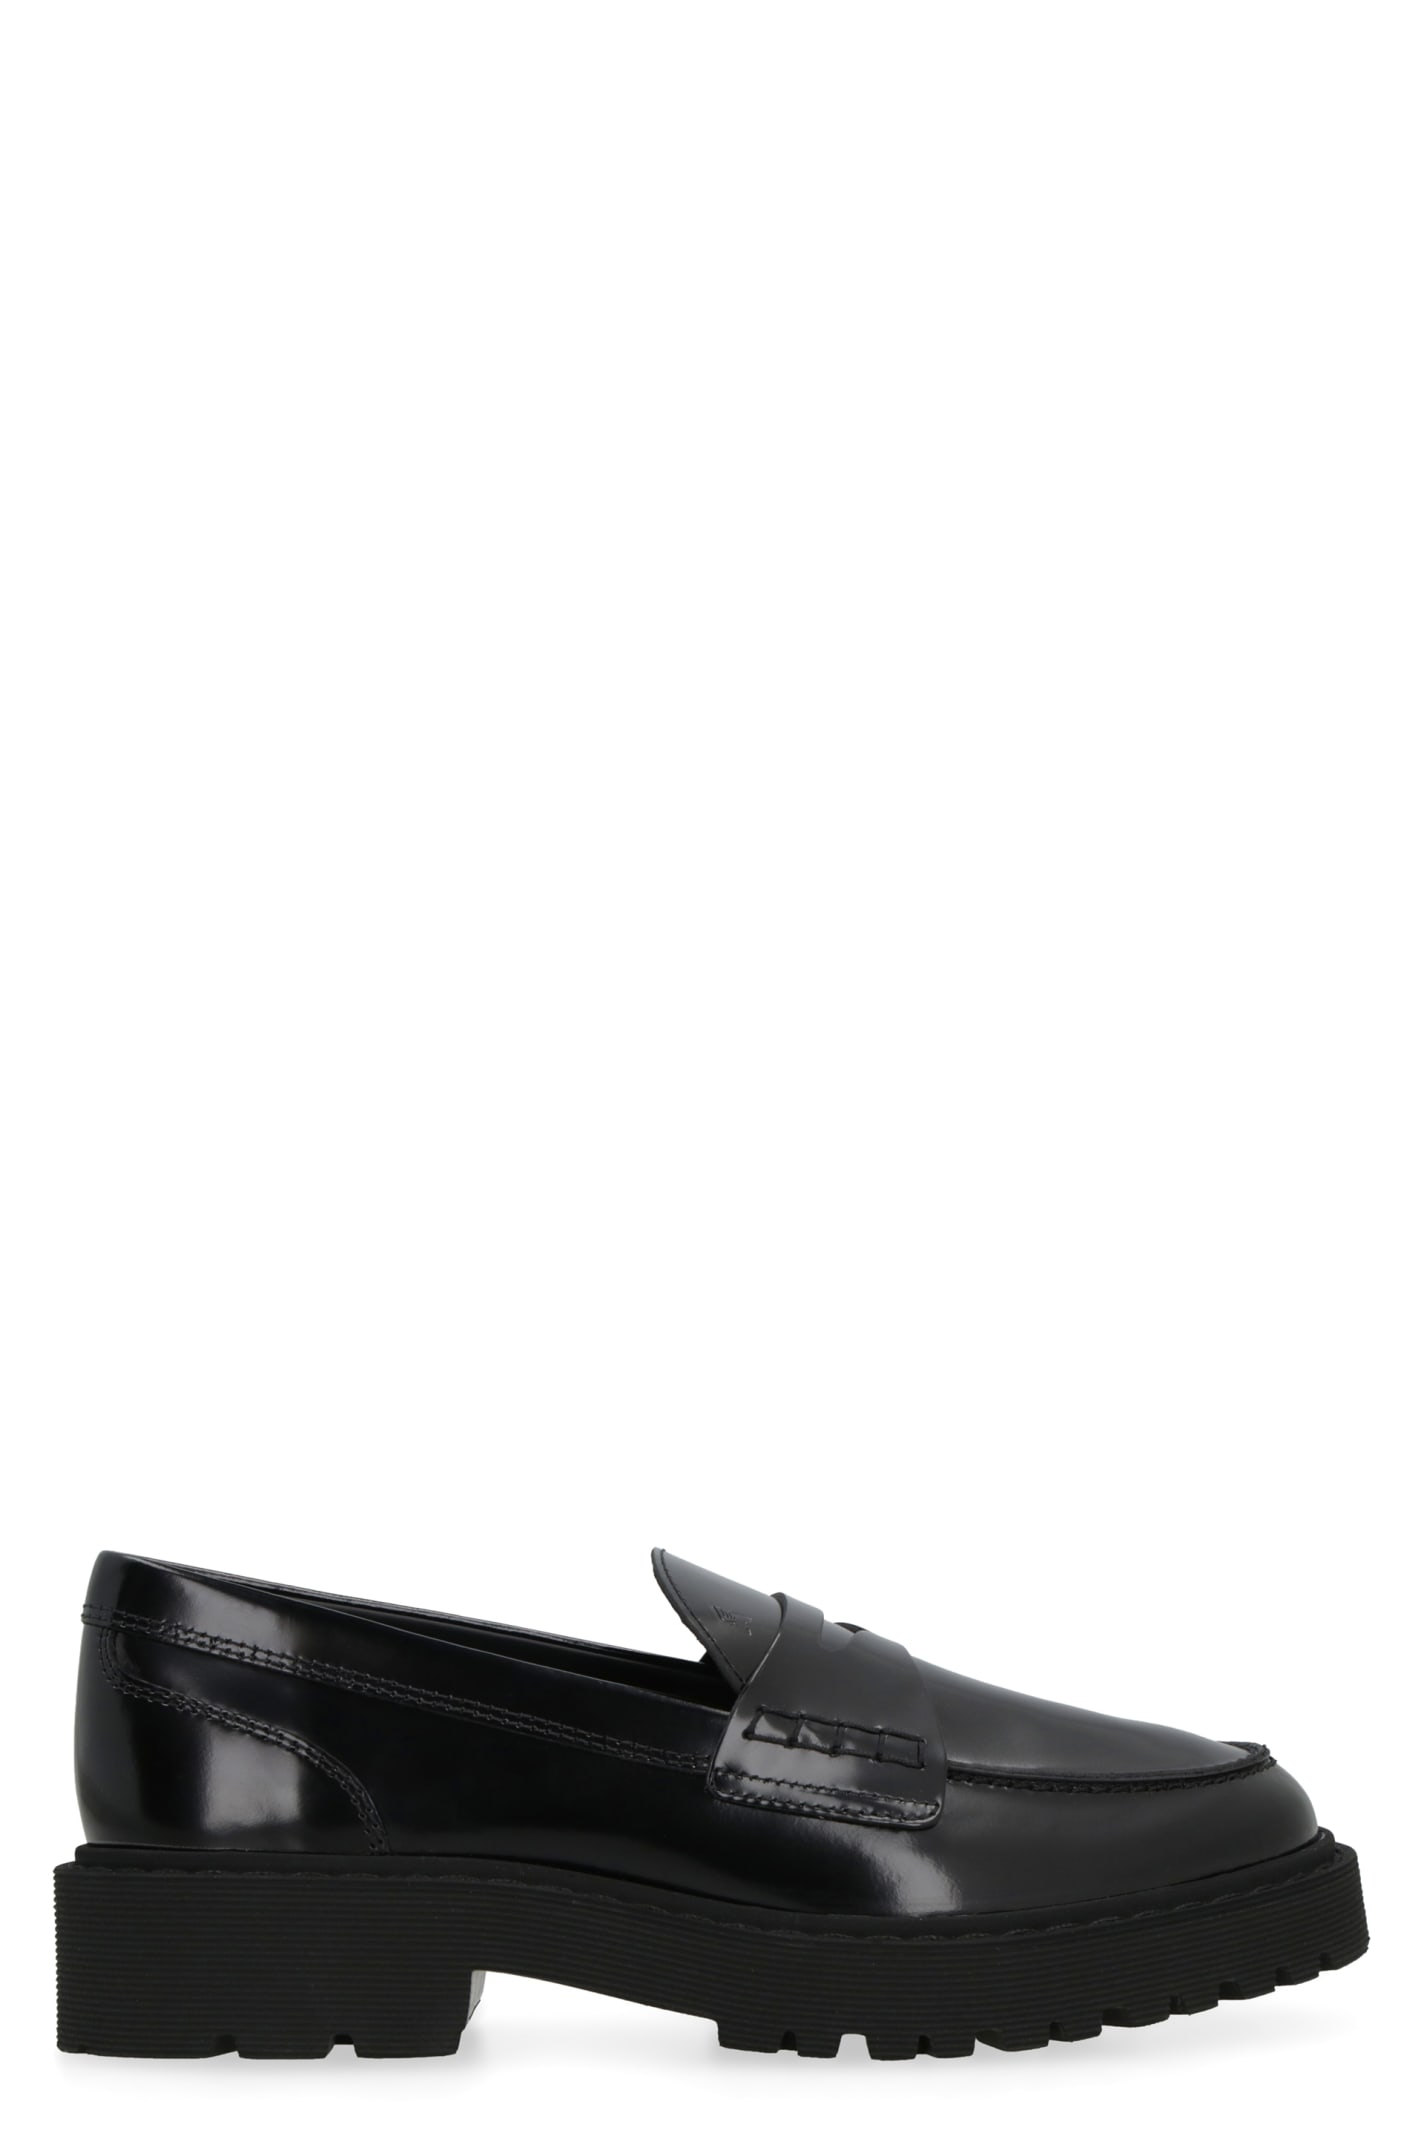 Hogan H543 Patent Leather Loafer In Black